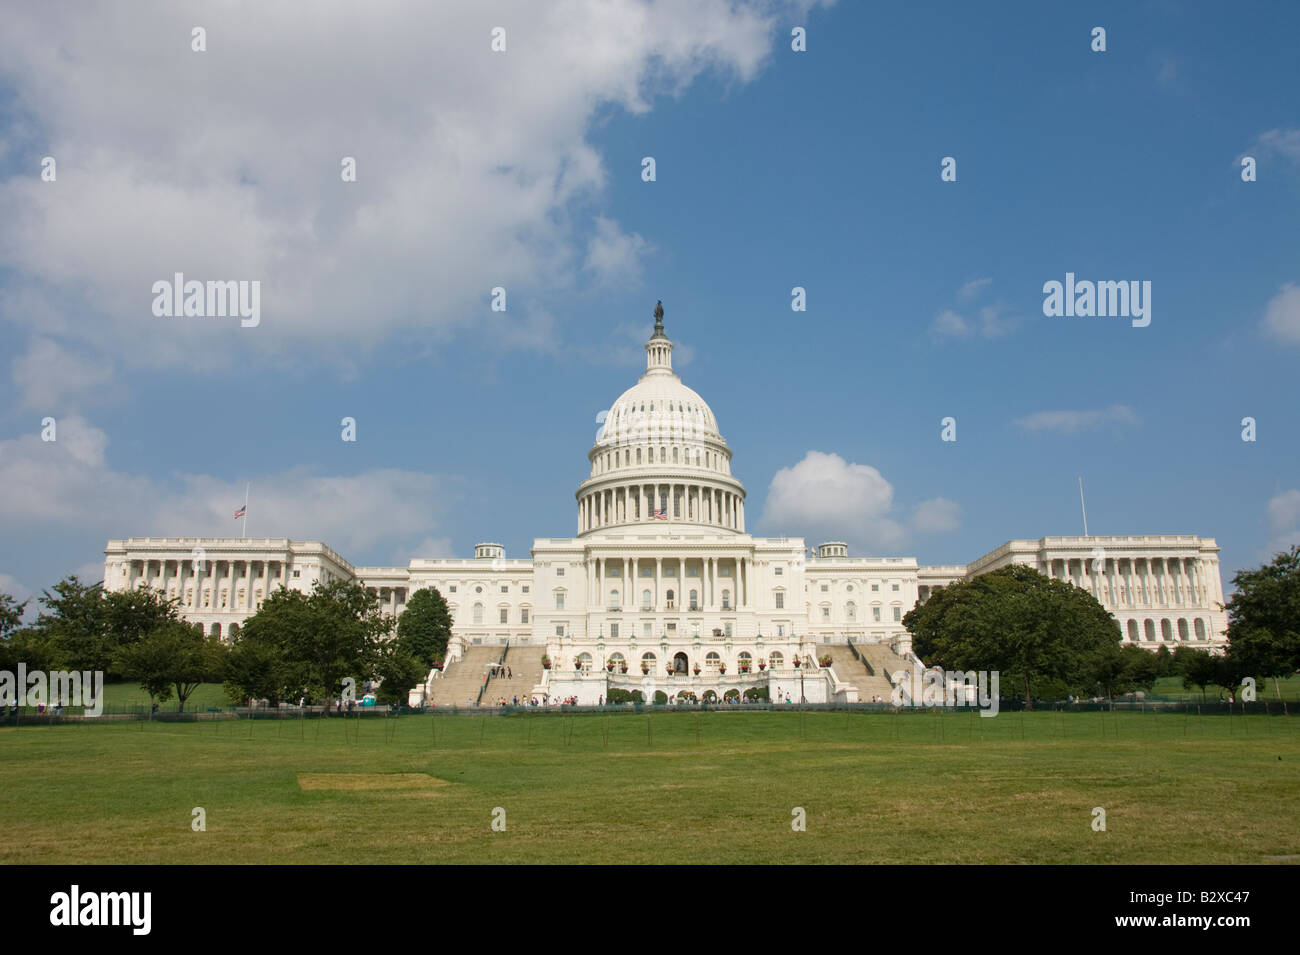 The US Capitol Building legislative branch of the US government. Stock Photo